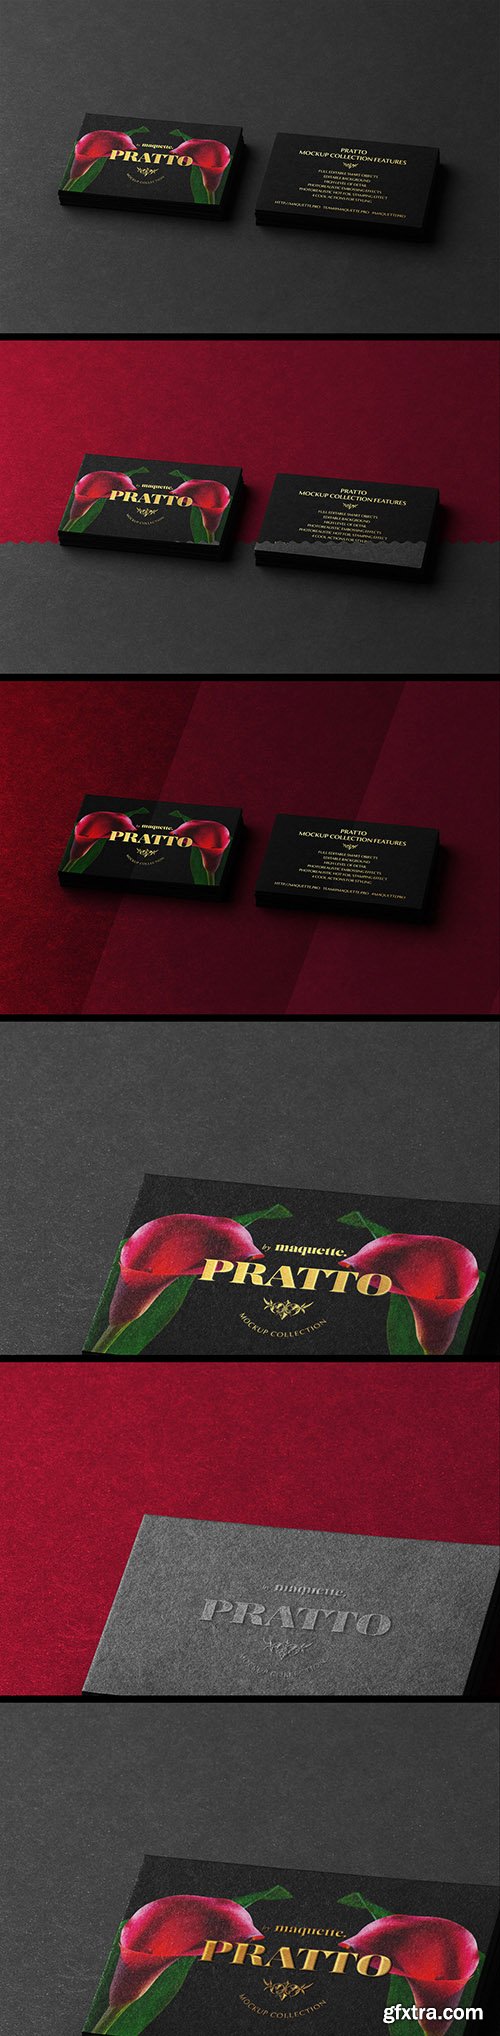 Two Black and Gold Business Cards Mockup 2 130437460